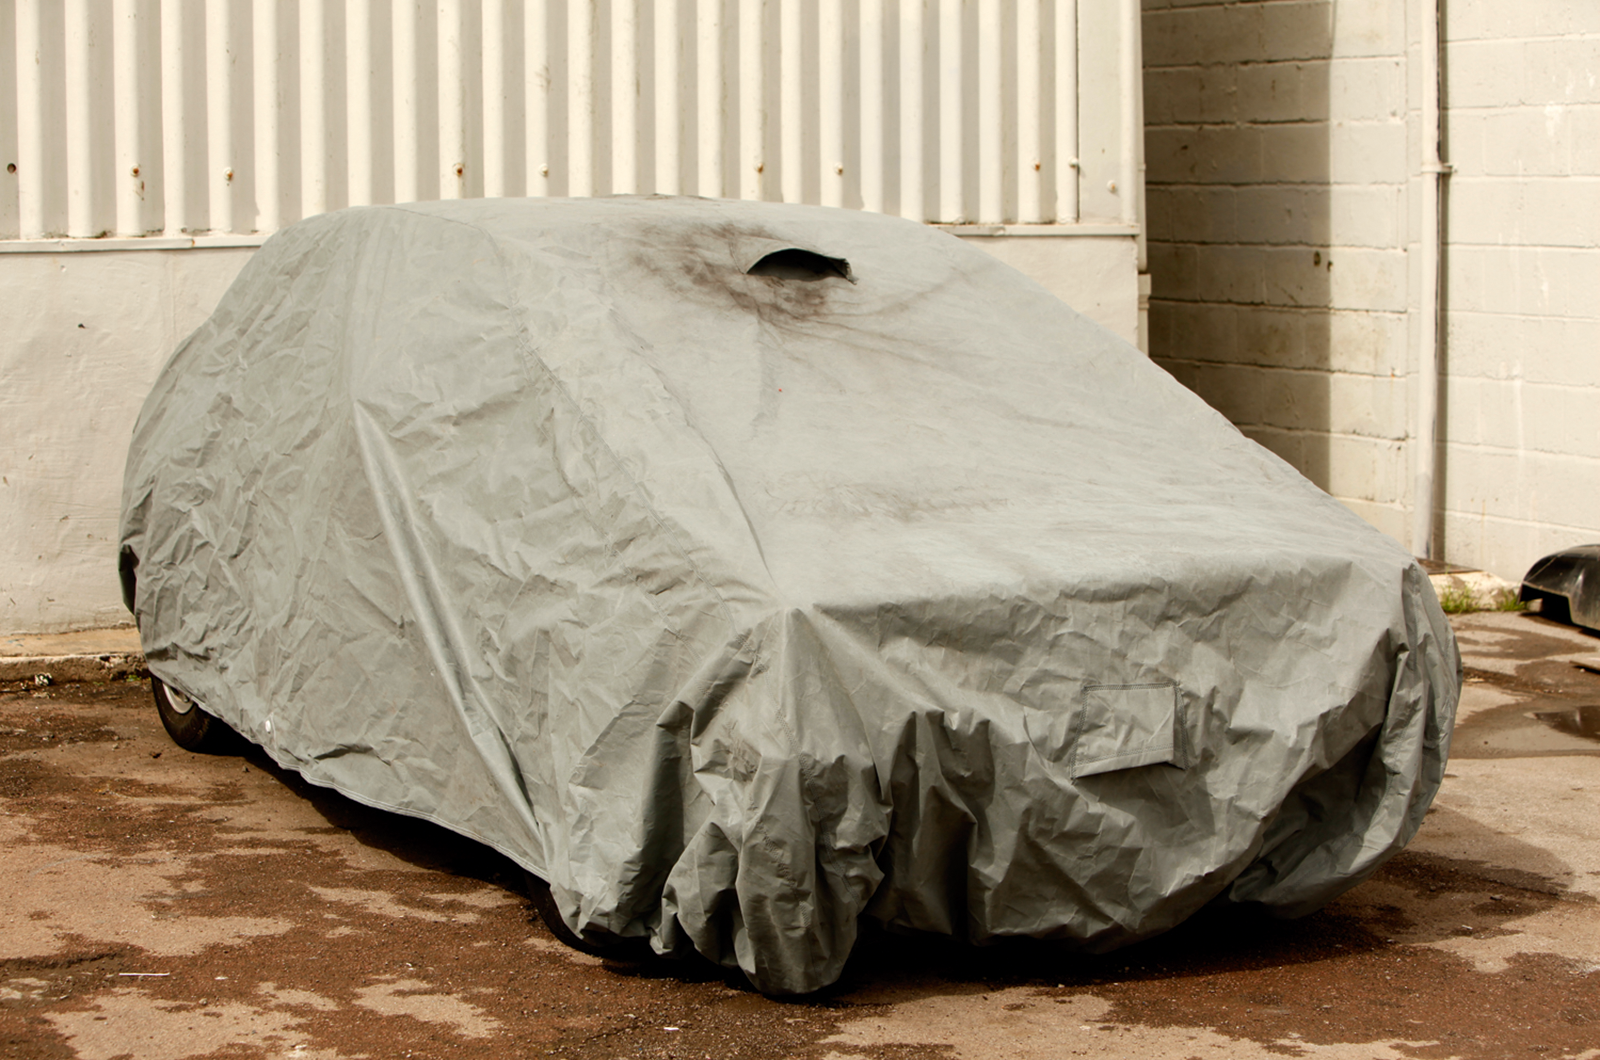 How to choose a good car cover